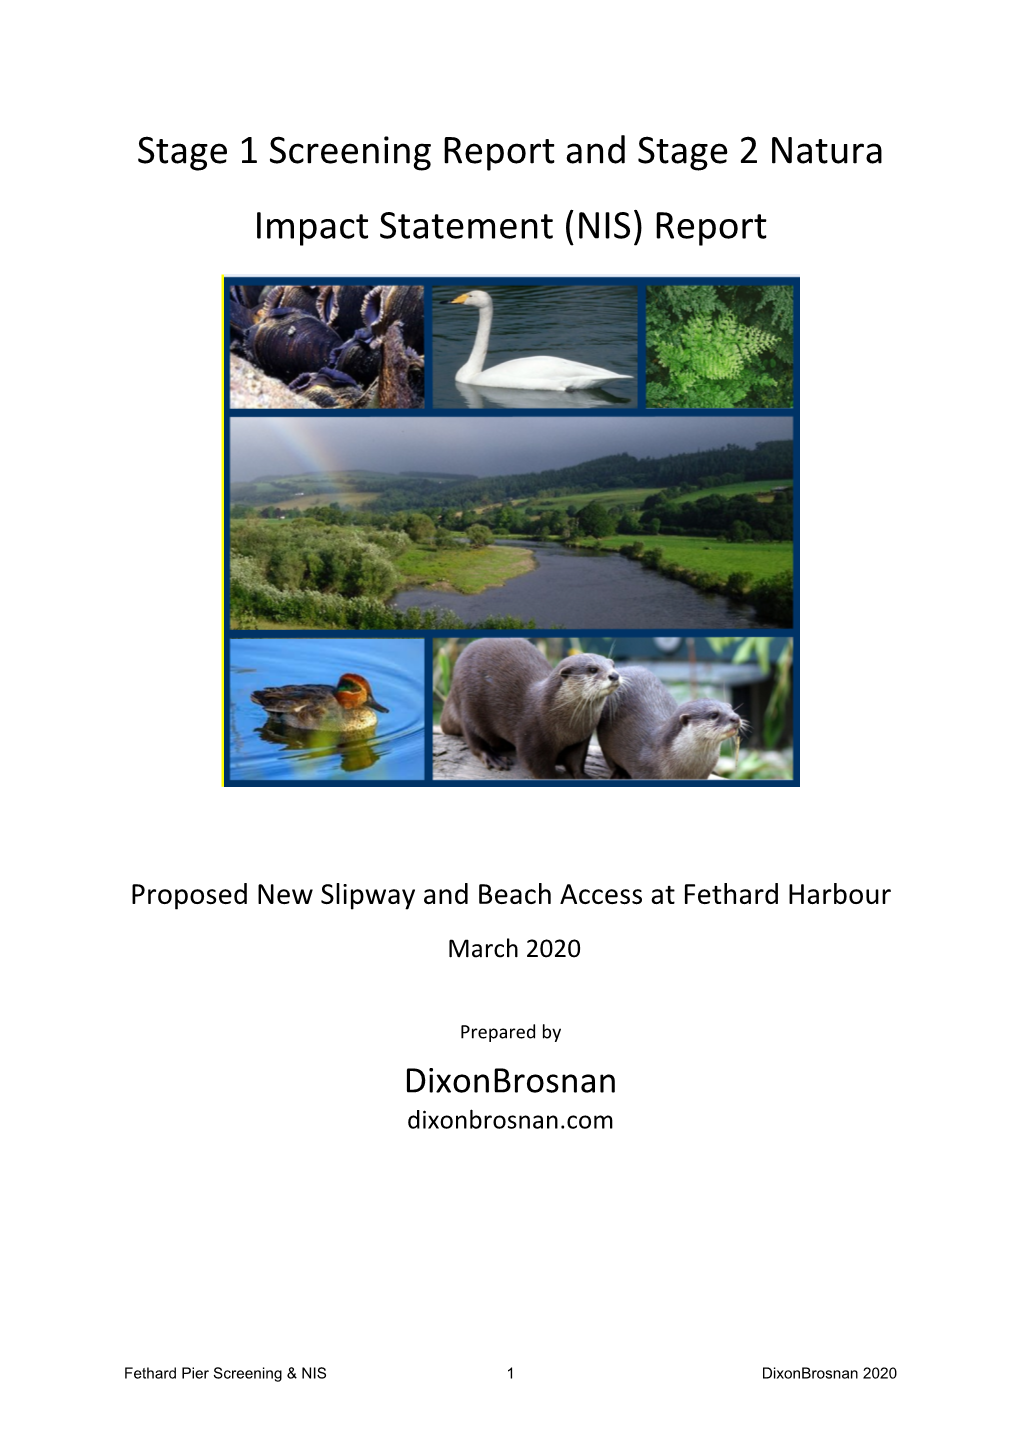 Stage 1 Screening Report and Stage 2 Natura Impact Statement (NIS) Report